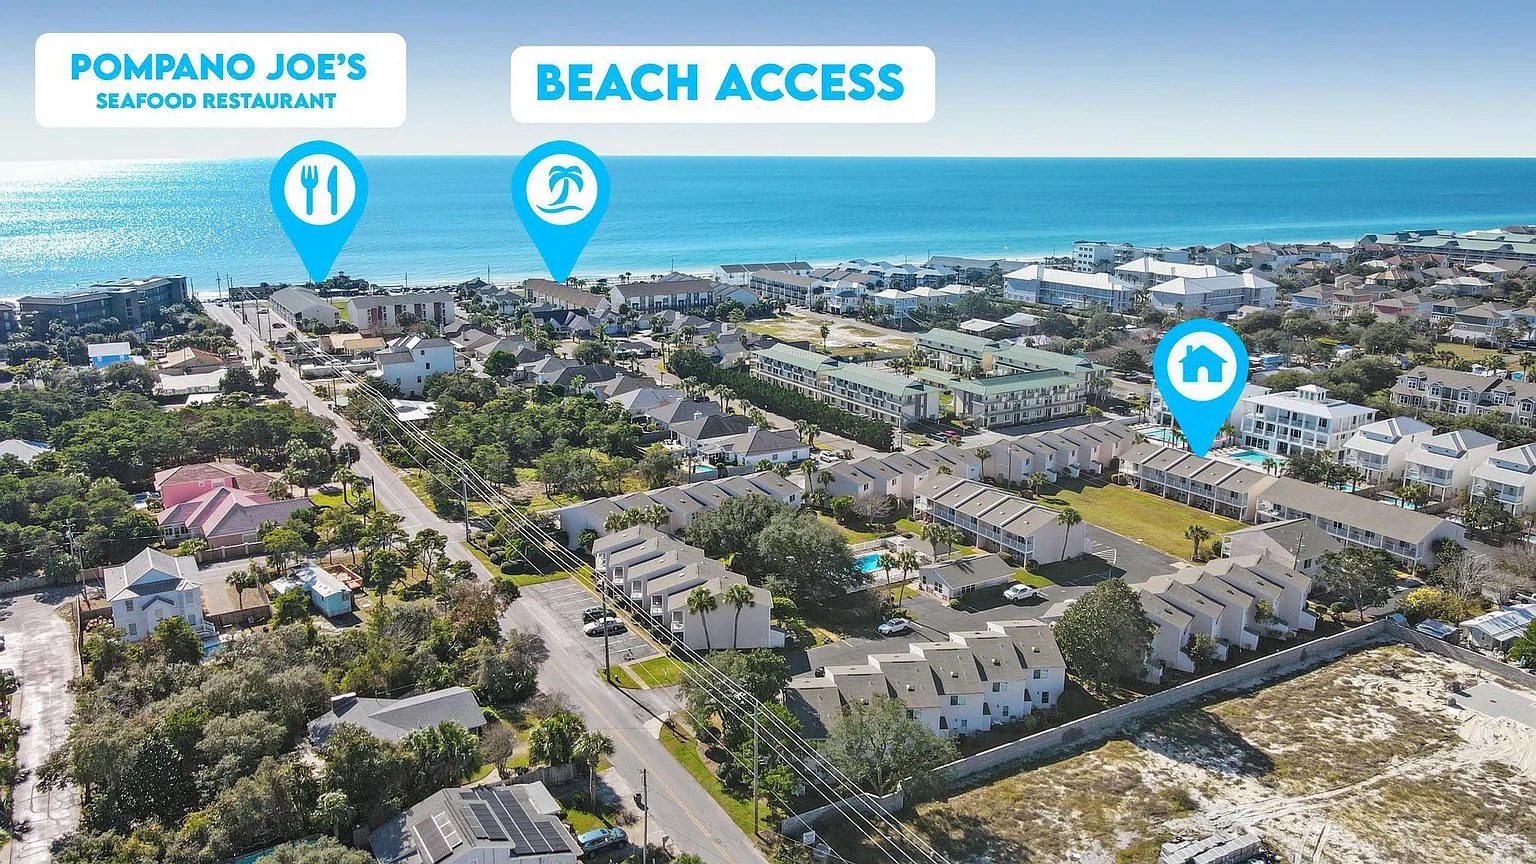 Beach access within close walking distance